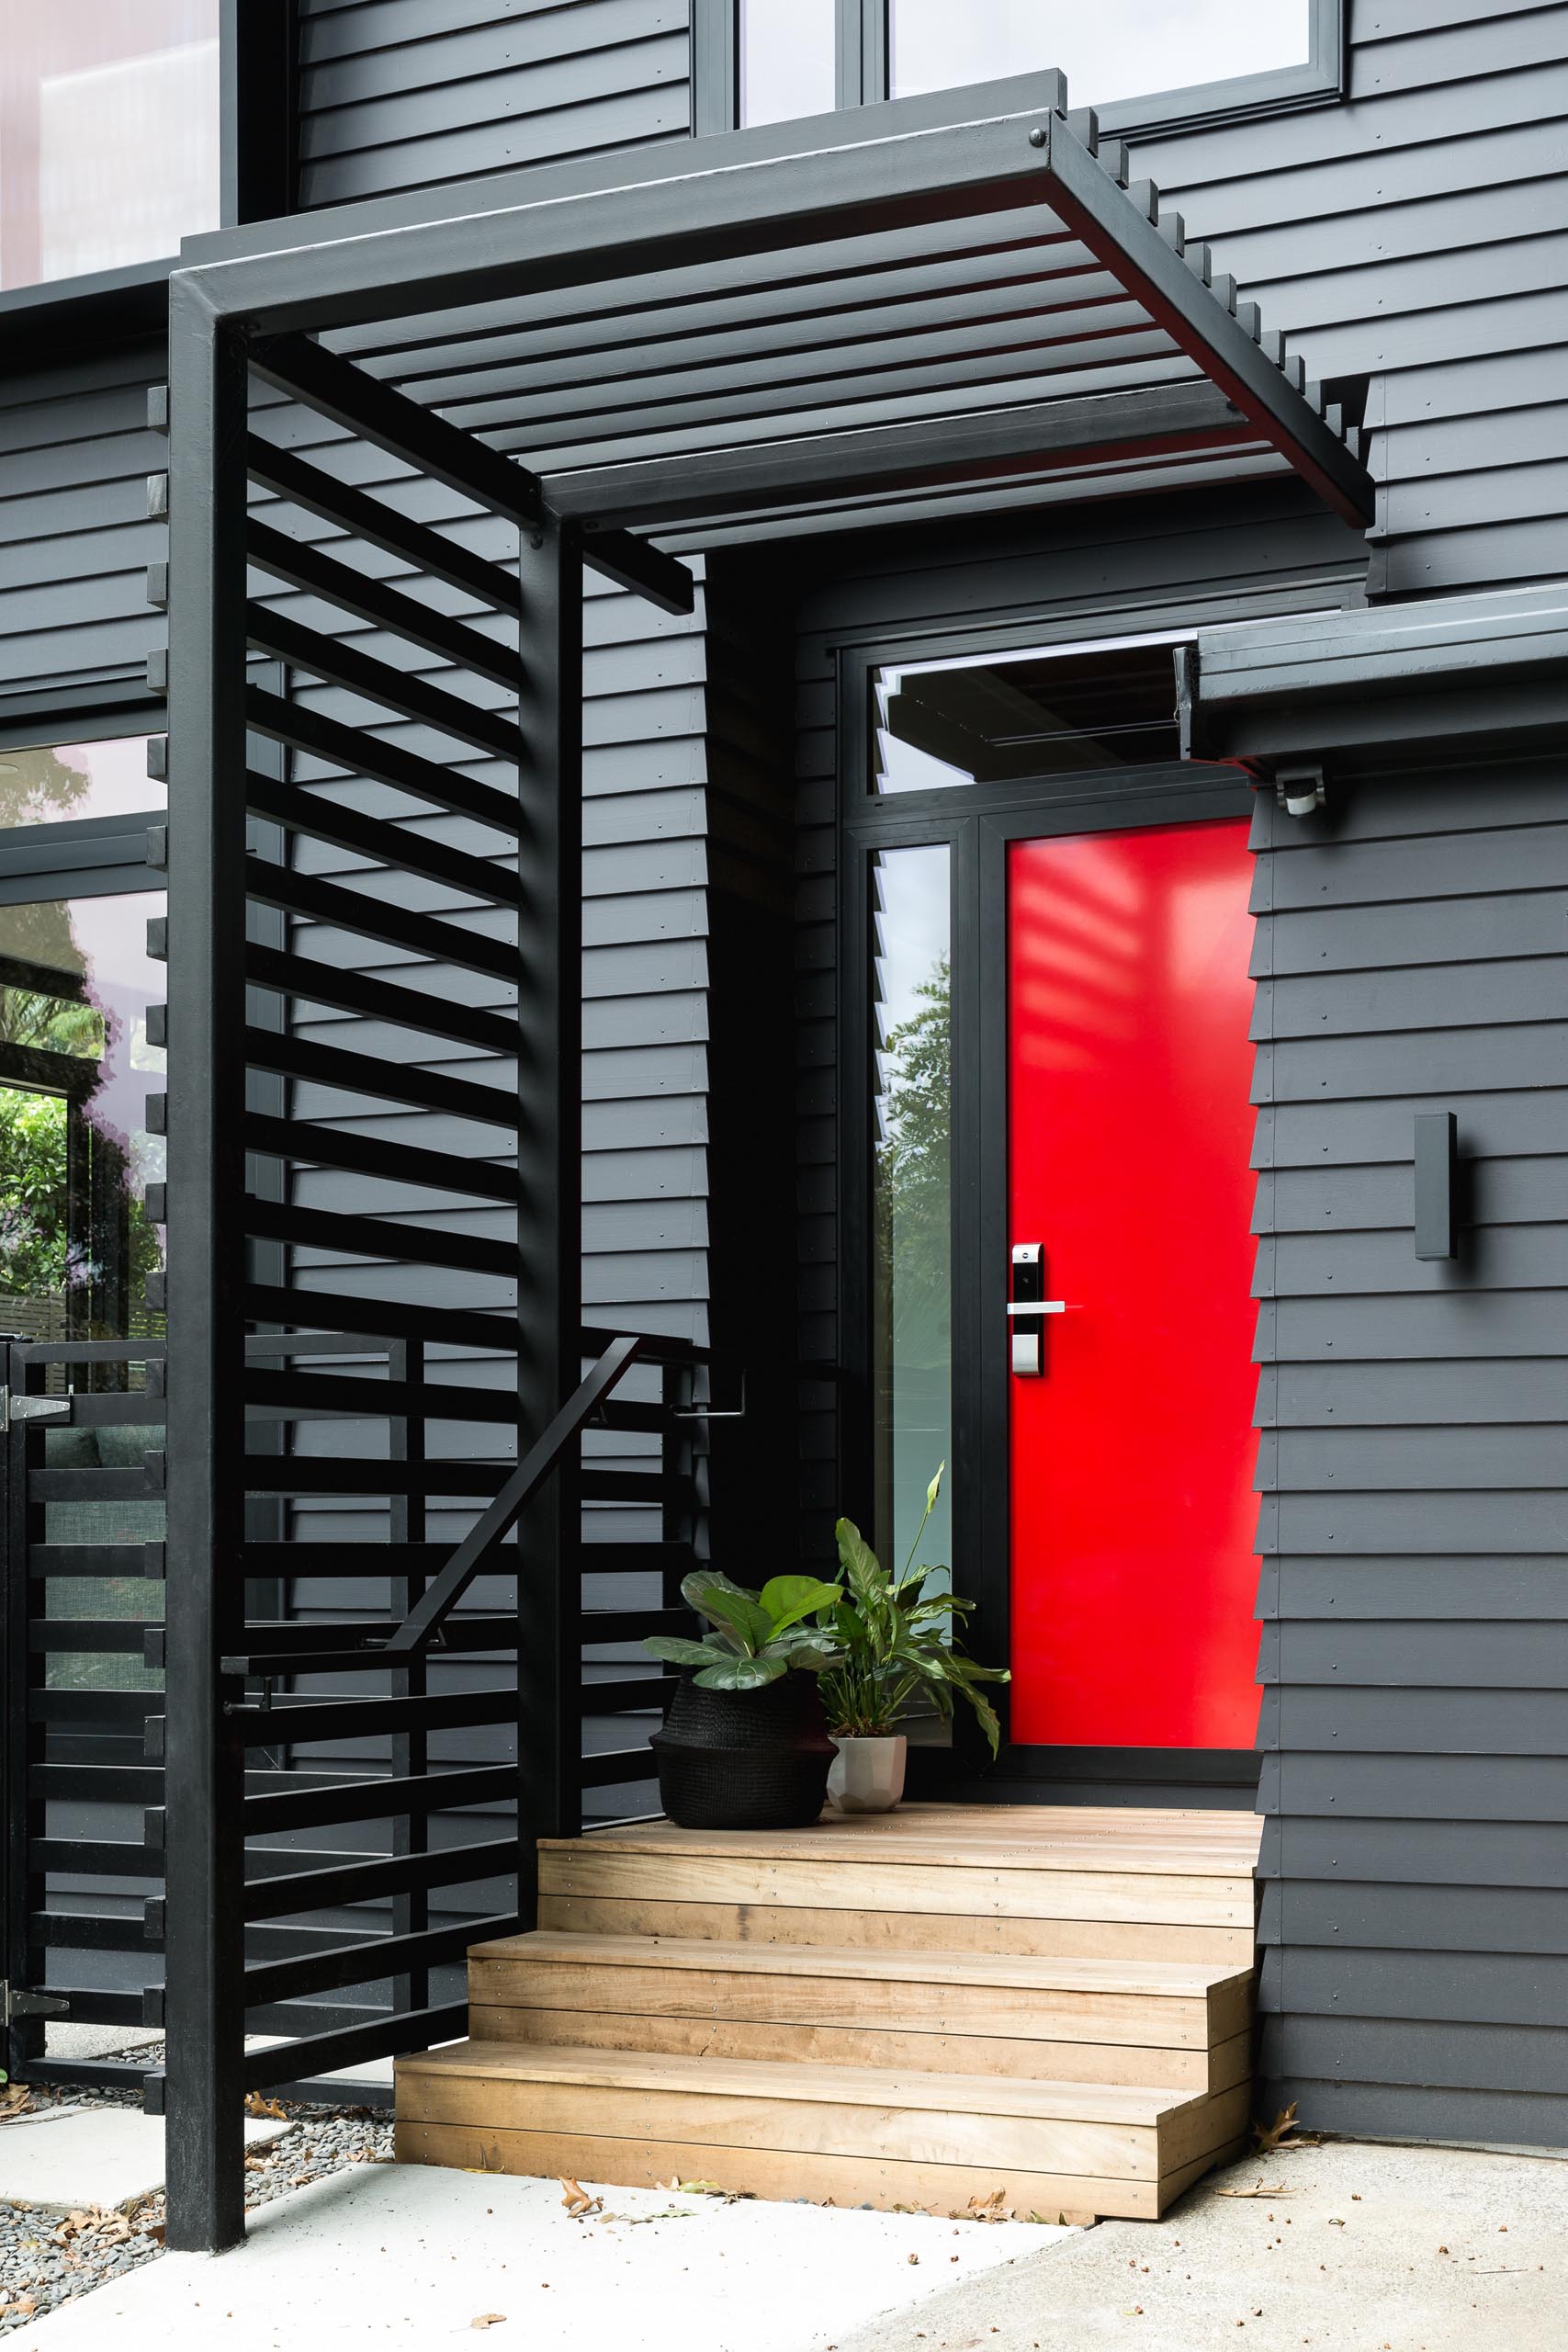 This modern house is in cedar weatherboards, and painted black creating a bold exterior, while the bright red door adds a strong contrasting design element.